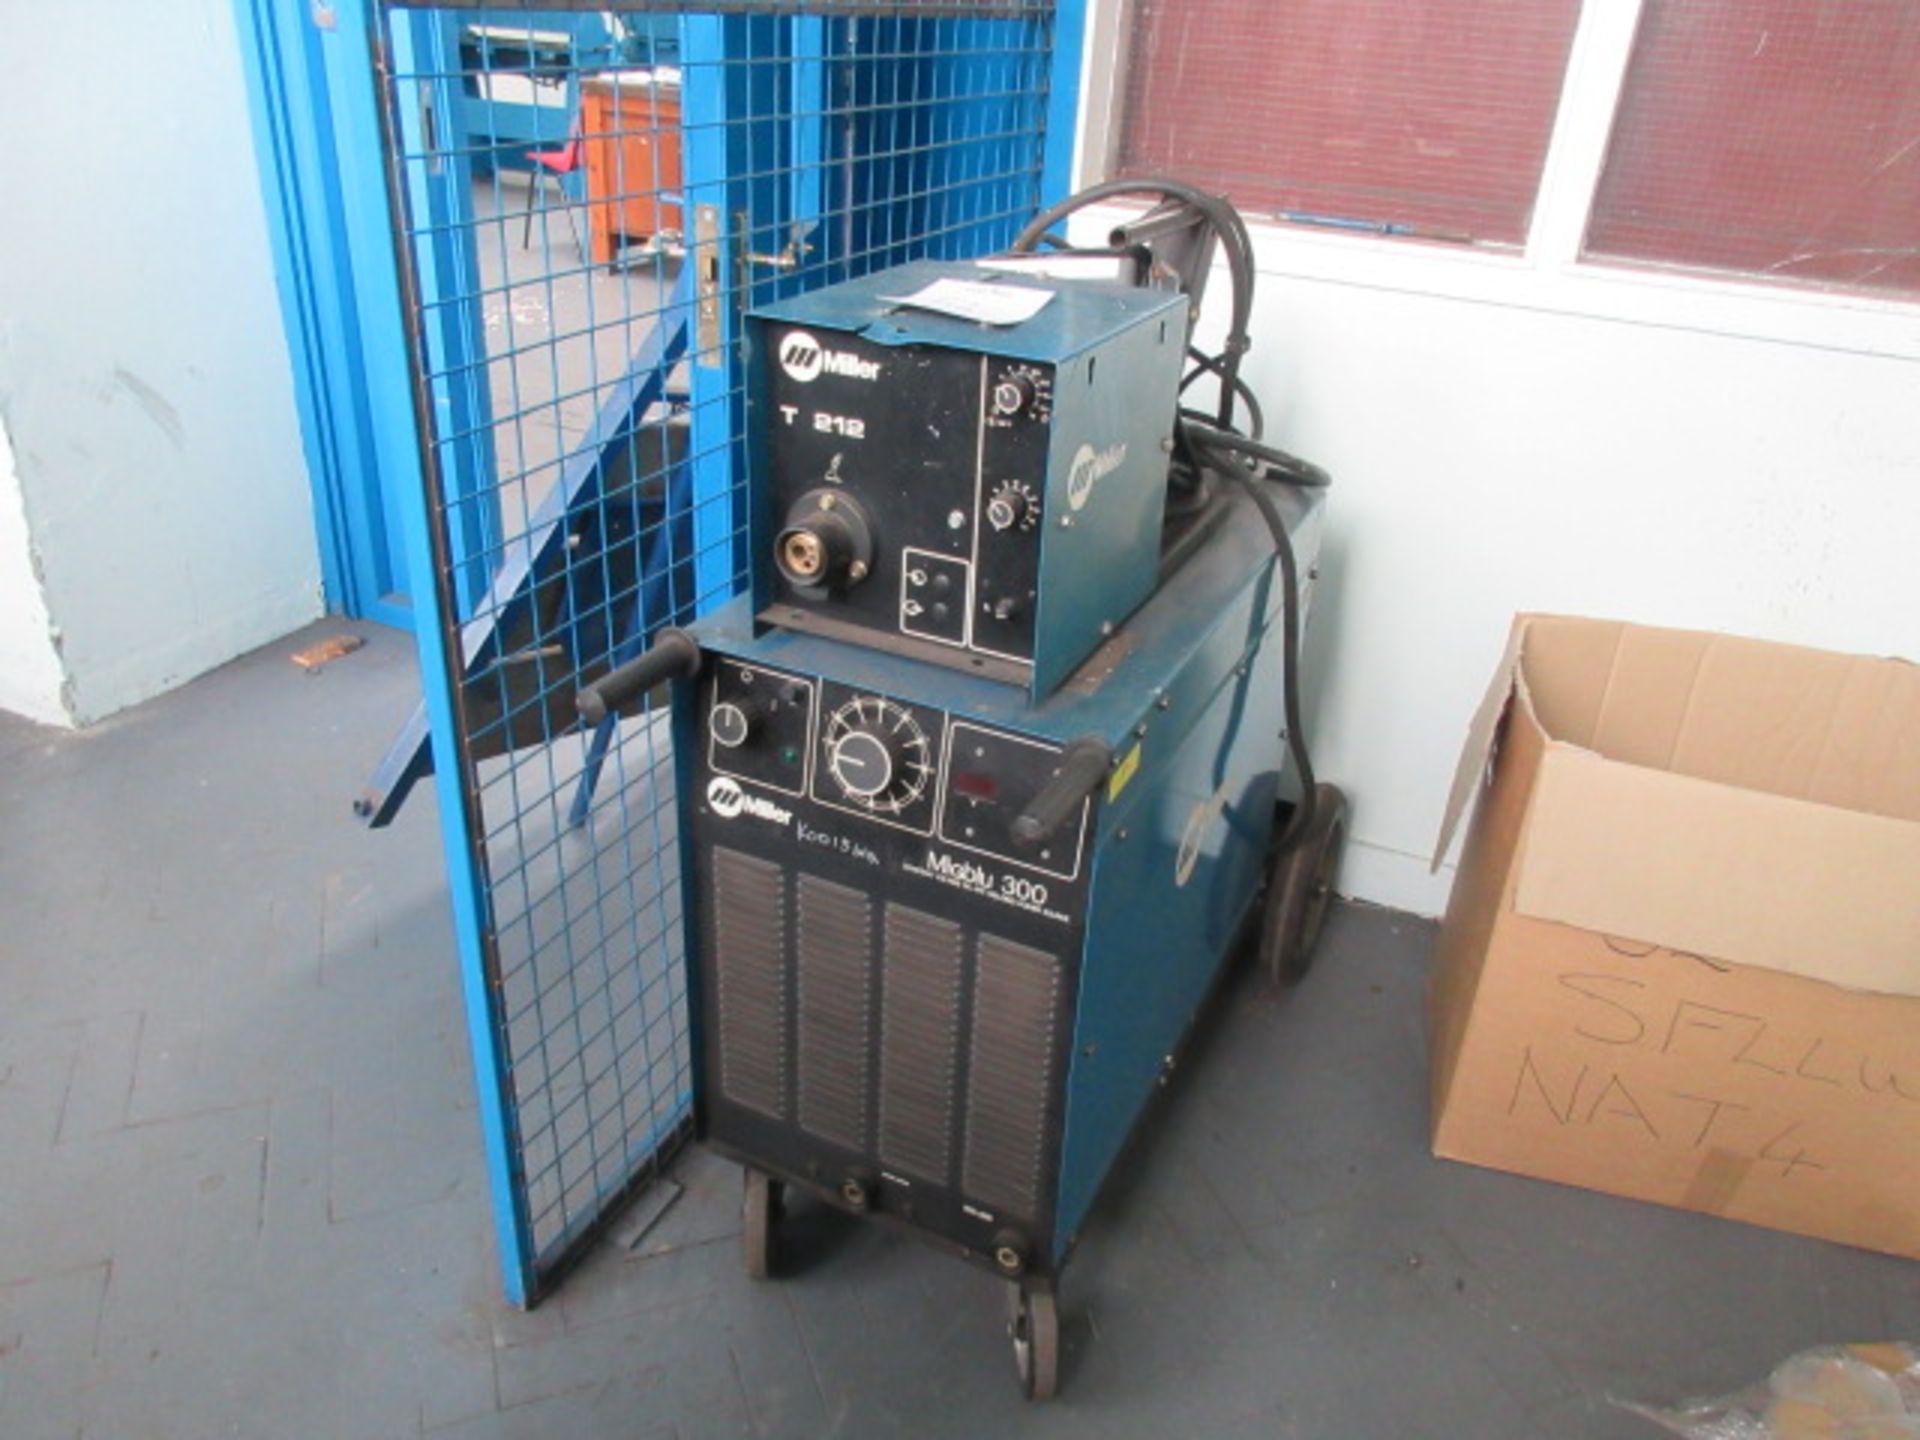 Miller MigBlu 300 constant voltage DC arc welding power source with T212 wire feed unit. No torch or